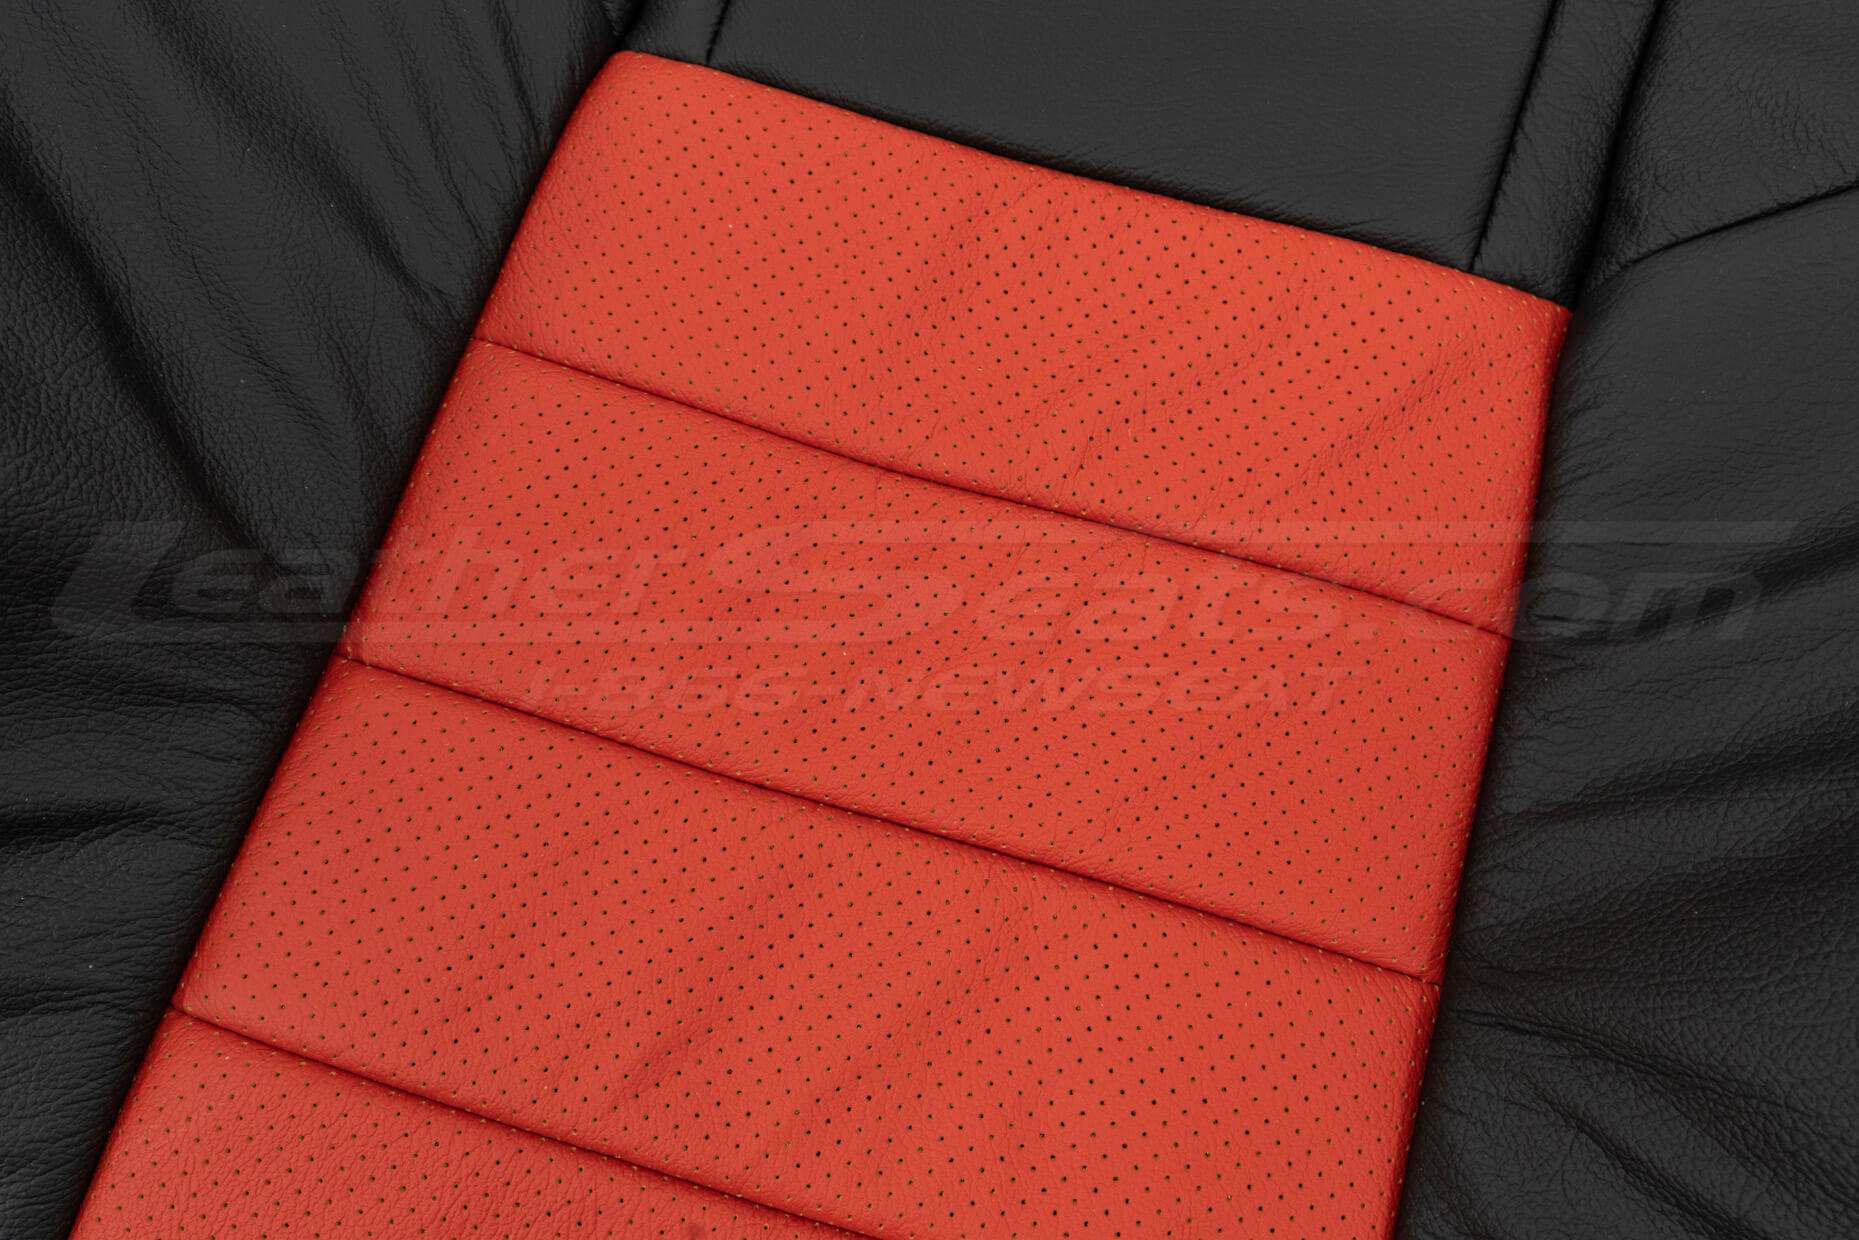 Backrest leather texture and Perforated Inserts close-up